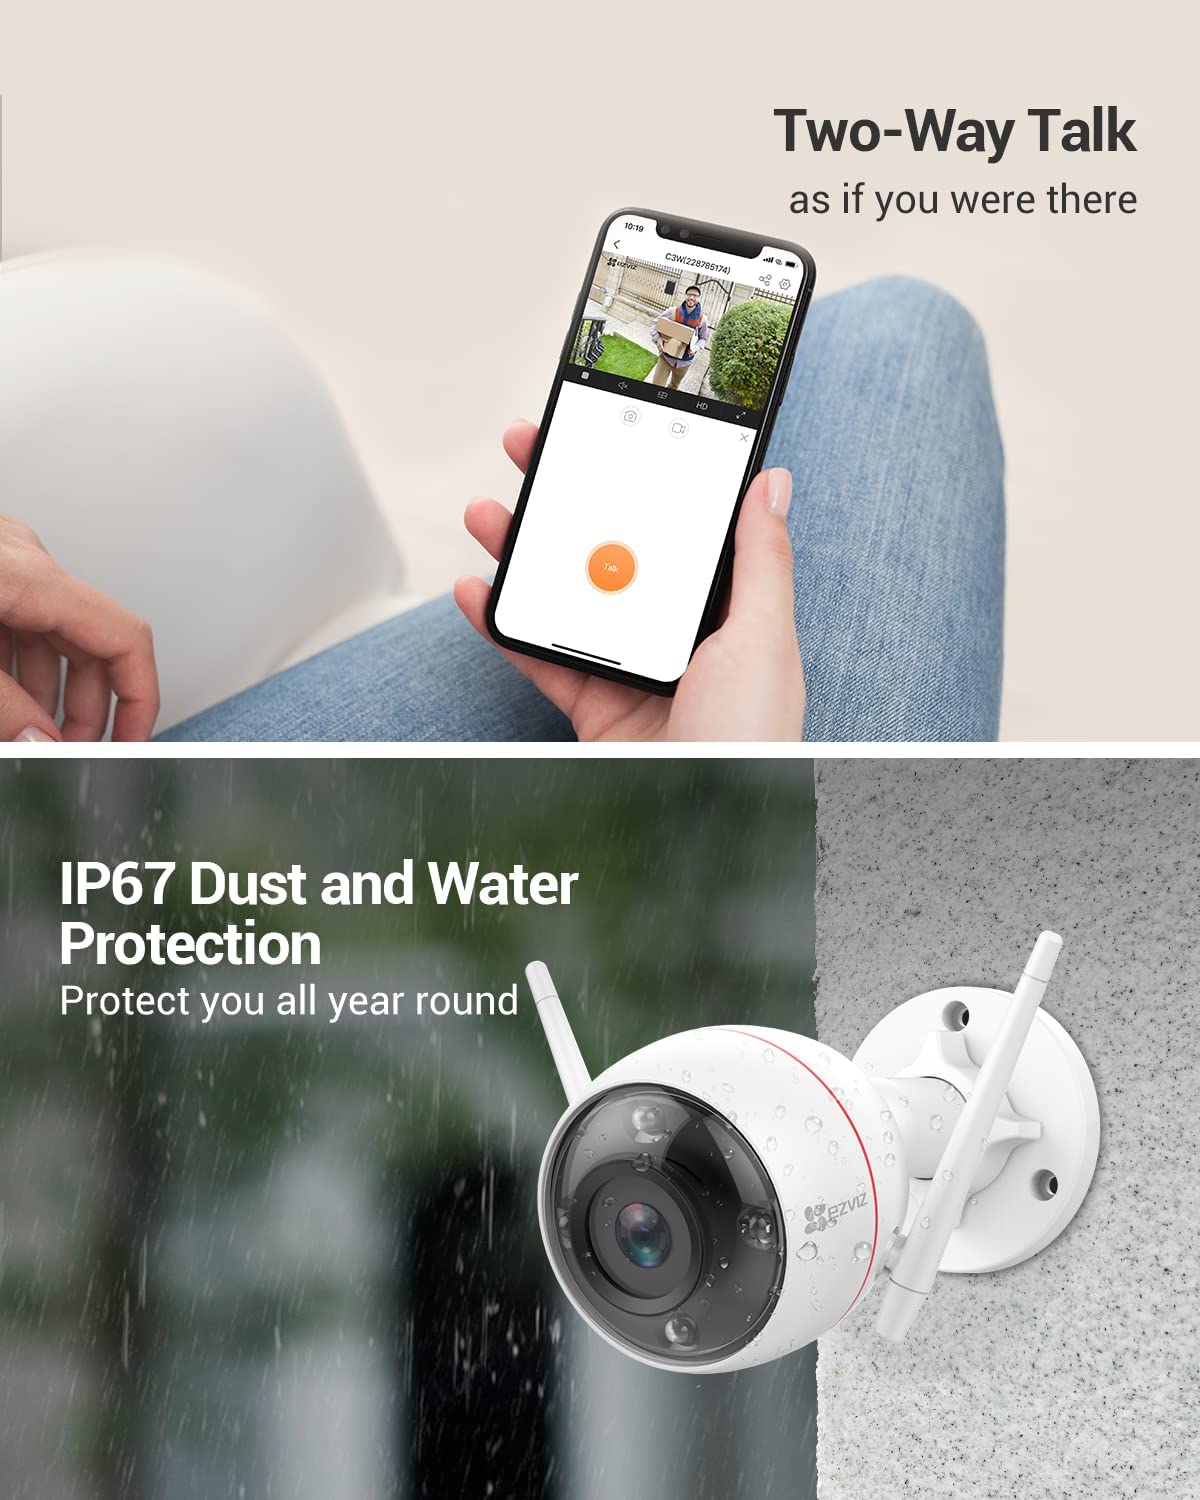 EZVIZ Security Camera Outdoor, 2k+ WiFi Camera, IP67 Waterproof, Color Night Vision, Customizable Voice Alerts,AI Person Detection, 2-Way Talk, H.265 Video Compression, 2.8mm Lens | C3W Pro 4MP